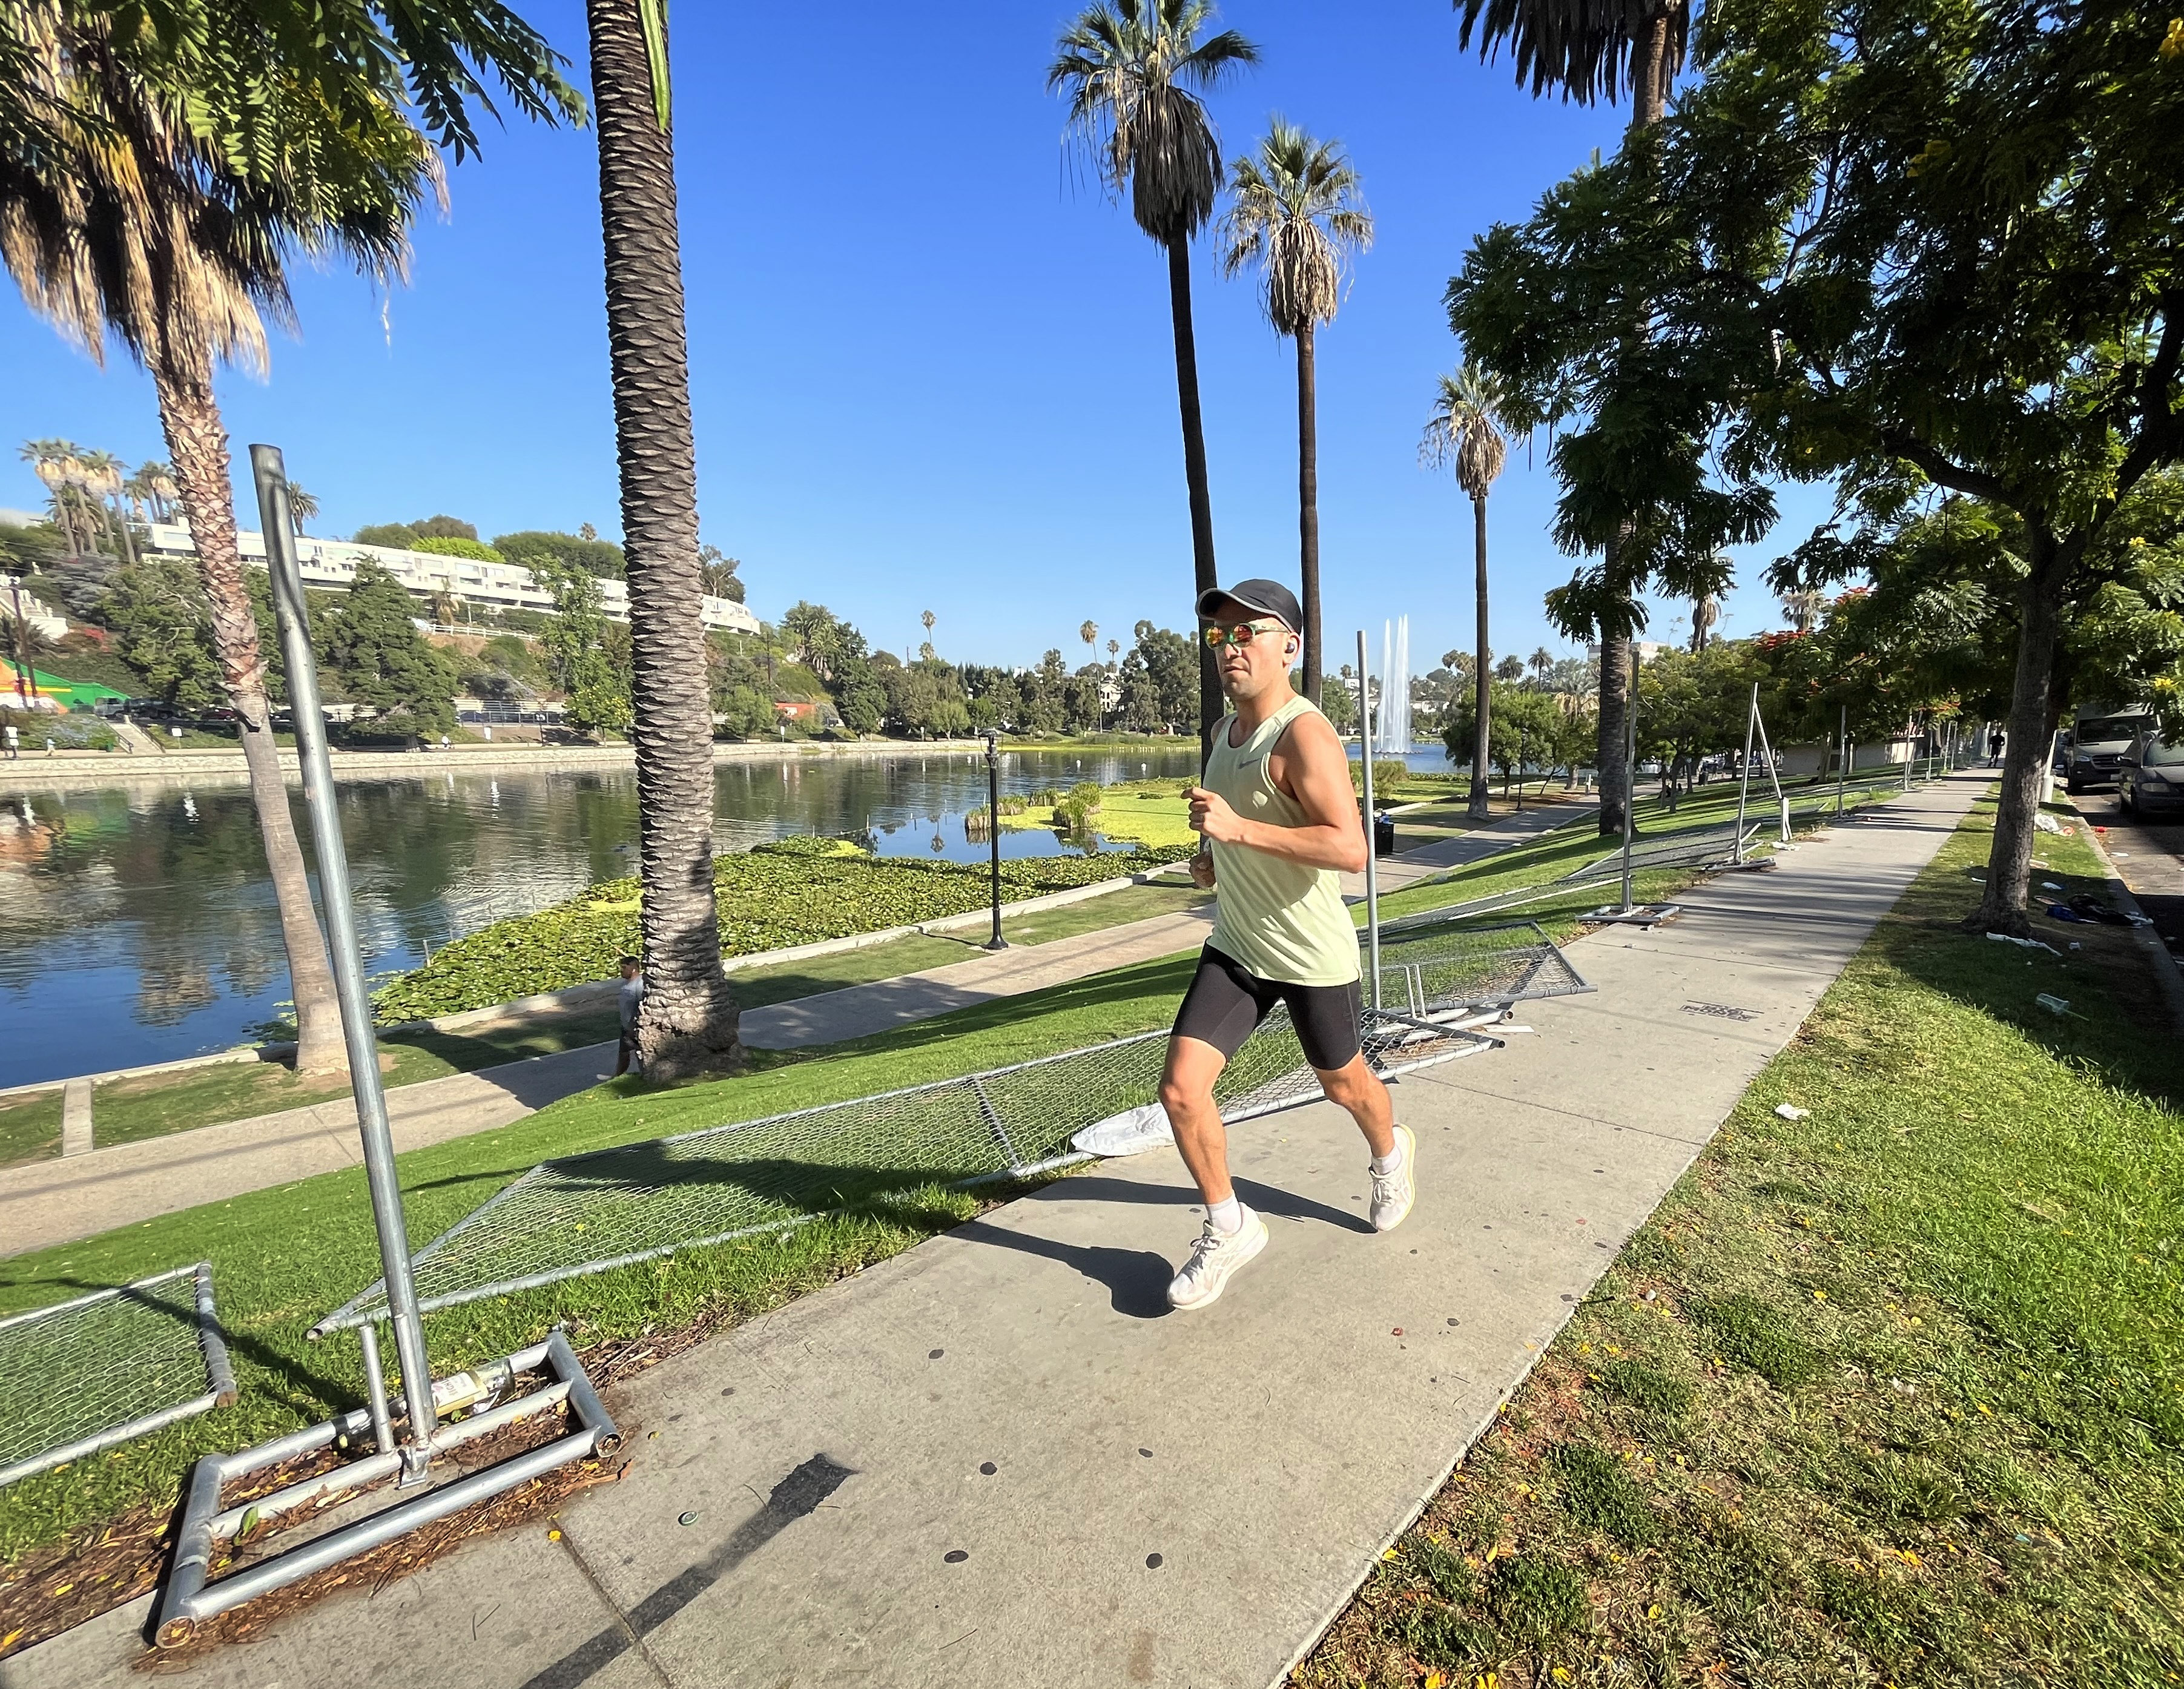 Echo Park Lake chain-link fence erected for repairs taken down